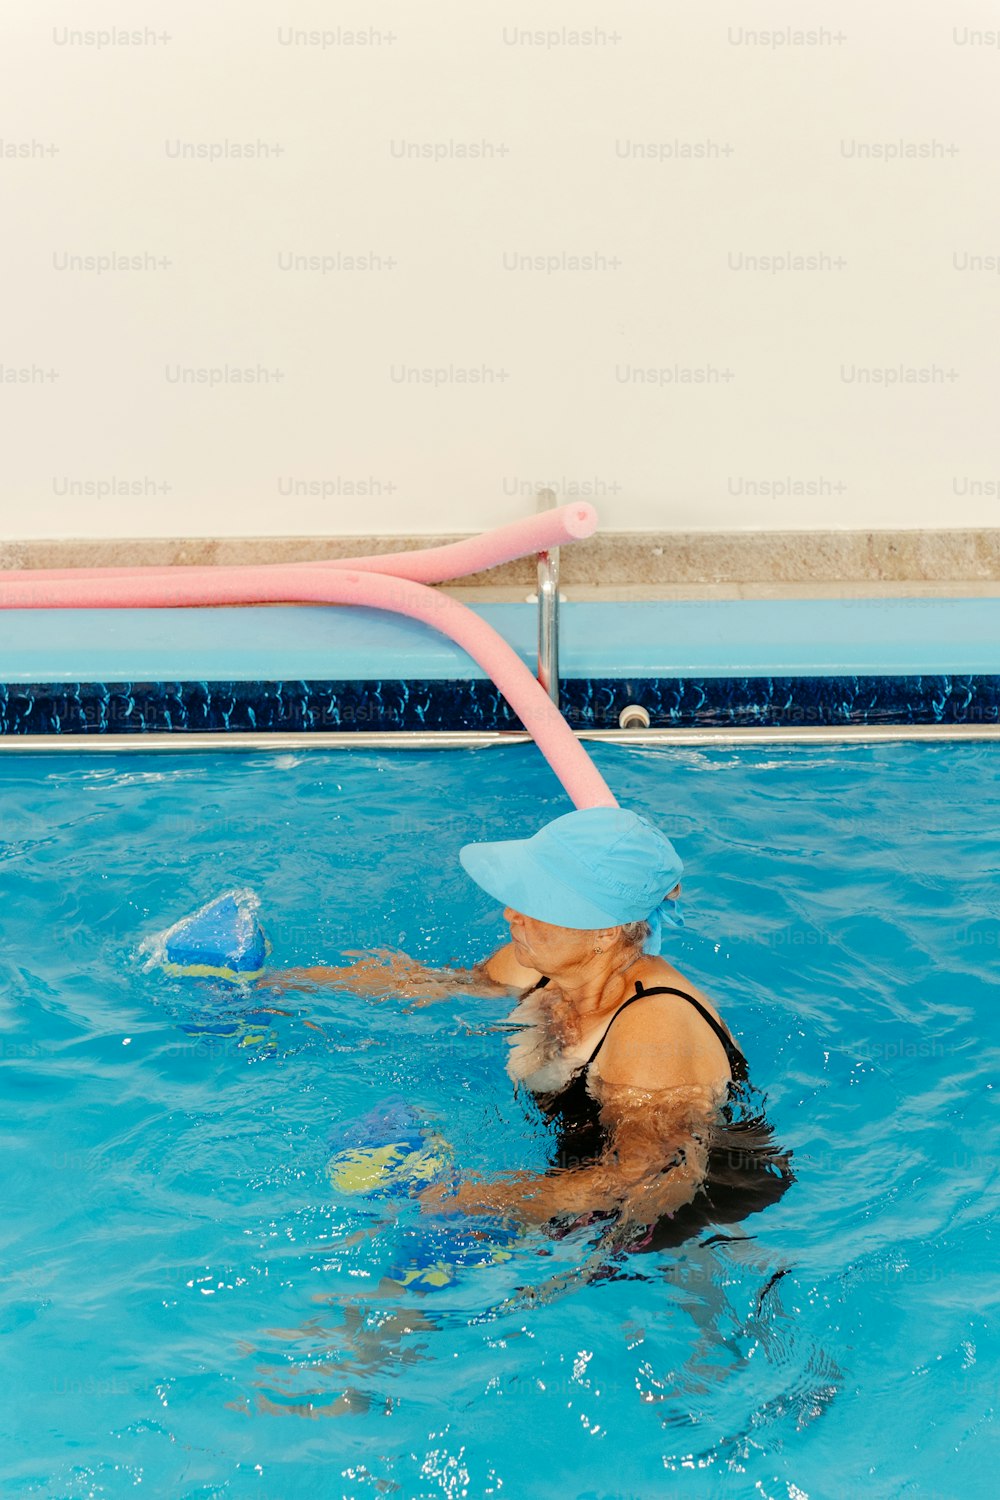 a dog in a swimming pool wearing a hat